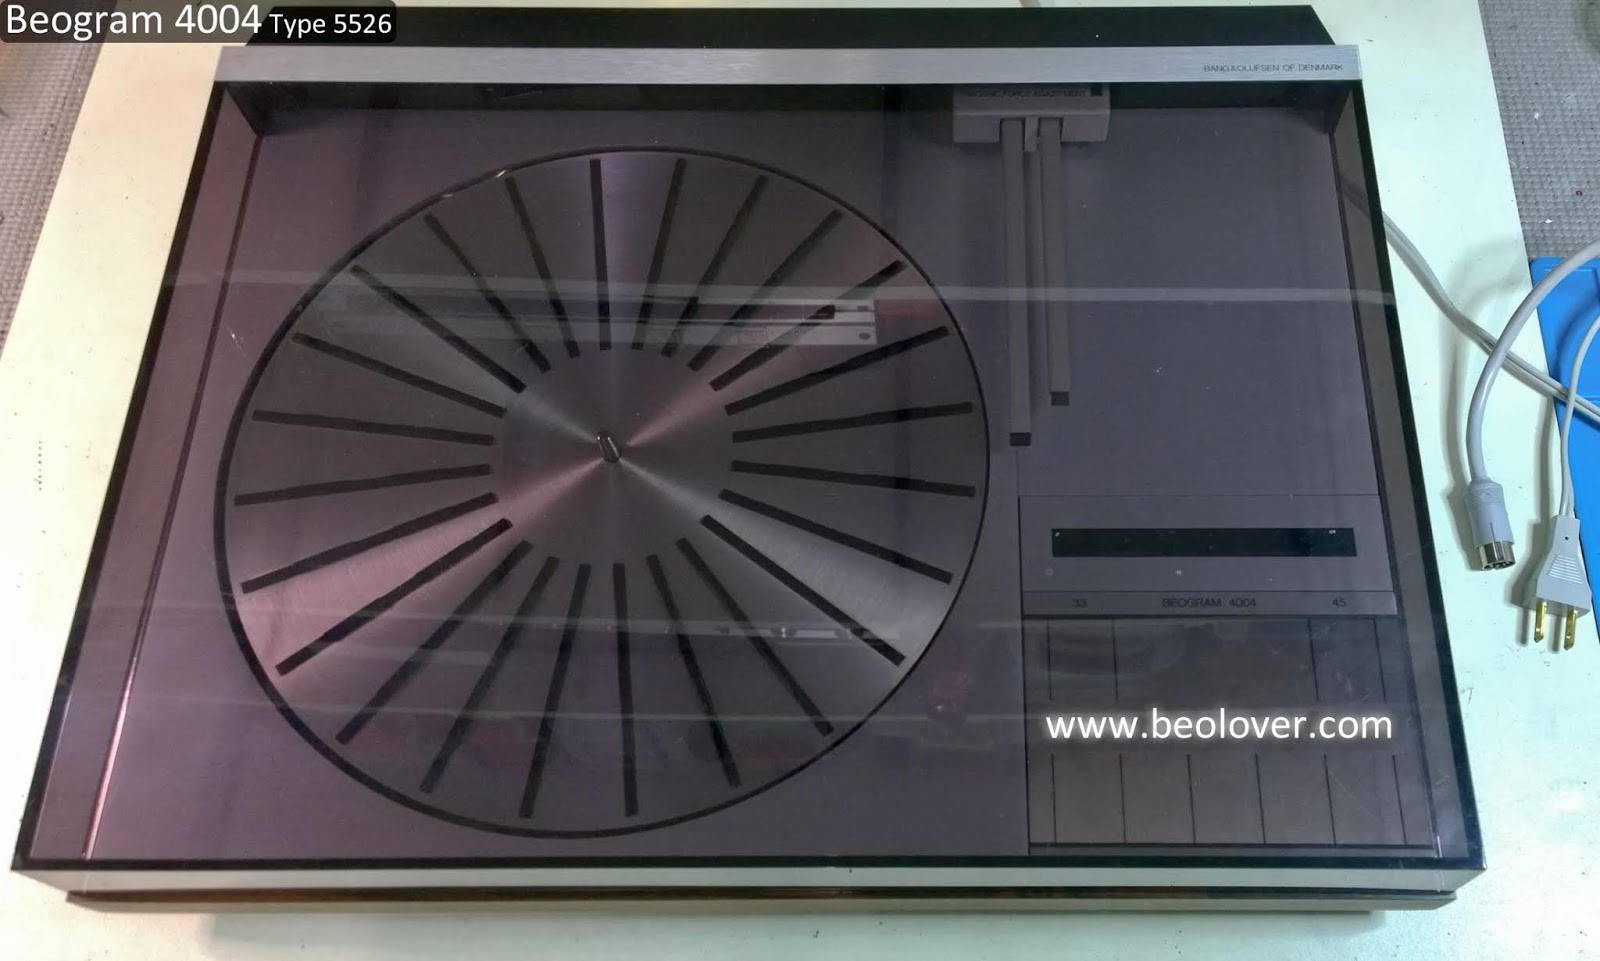 Bang and Olufsen Beogram 4004 5526